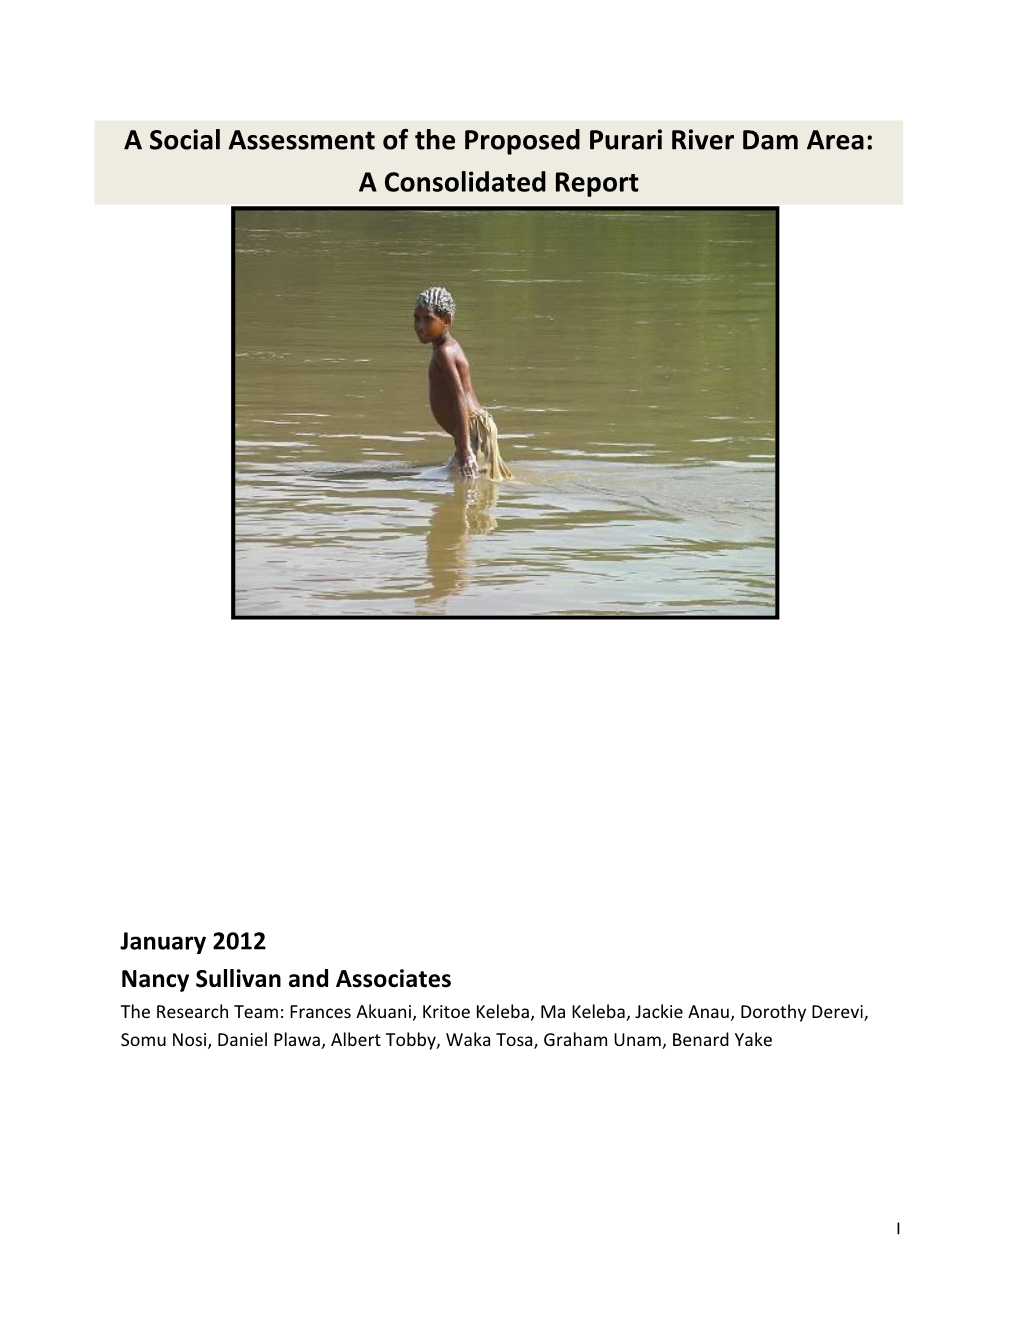 A Social Assessment of the Proposed Purari River Dam Area: a Consolidated Report